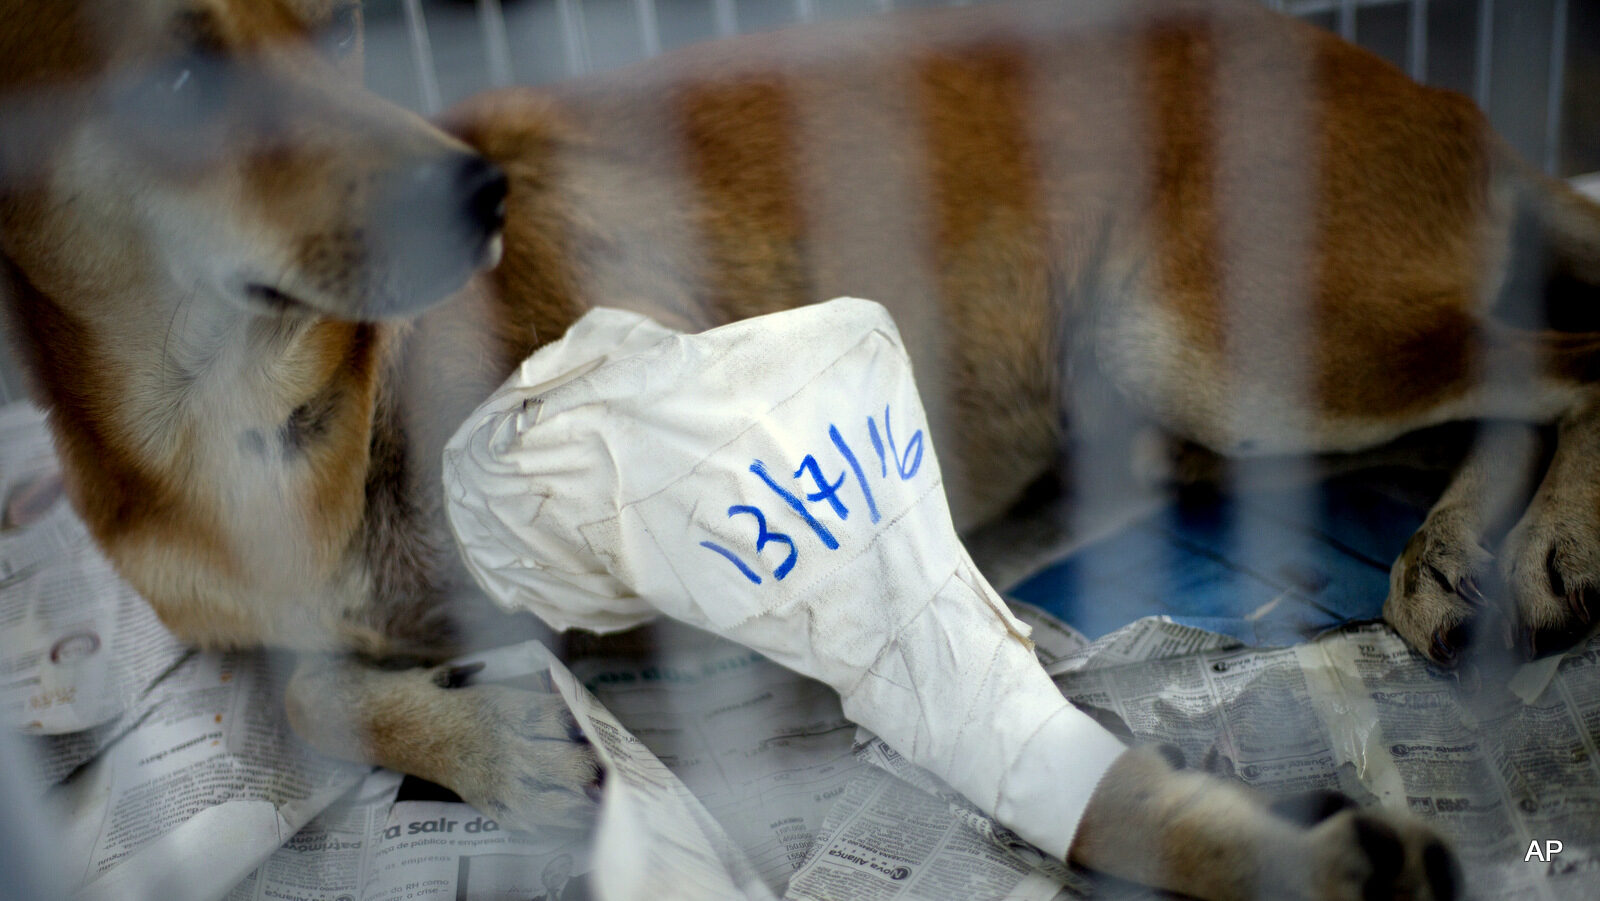 In this July 14, 2016 photo, Sheik, suffering from a bullet wound to his front leg, rests inside his cage at the shelter that is known by its Portuguese acronym SUIPA , in Rio de Janeiro, Brazil. Sheik was shot in the Jacarezinho slum on June 14 during a firefight. The city does not keep data for animal deaths or injuries related to shootings. But veterinarians at the shelter say they have seen a sharp increase in recent months, especially in slums where pets and strays roam freely.